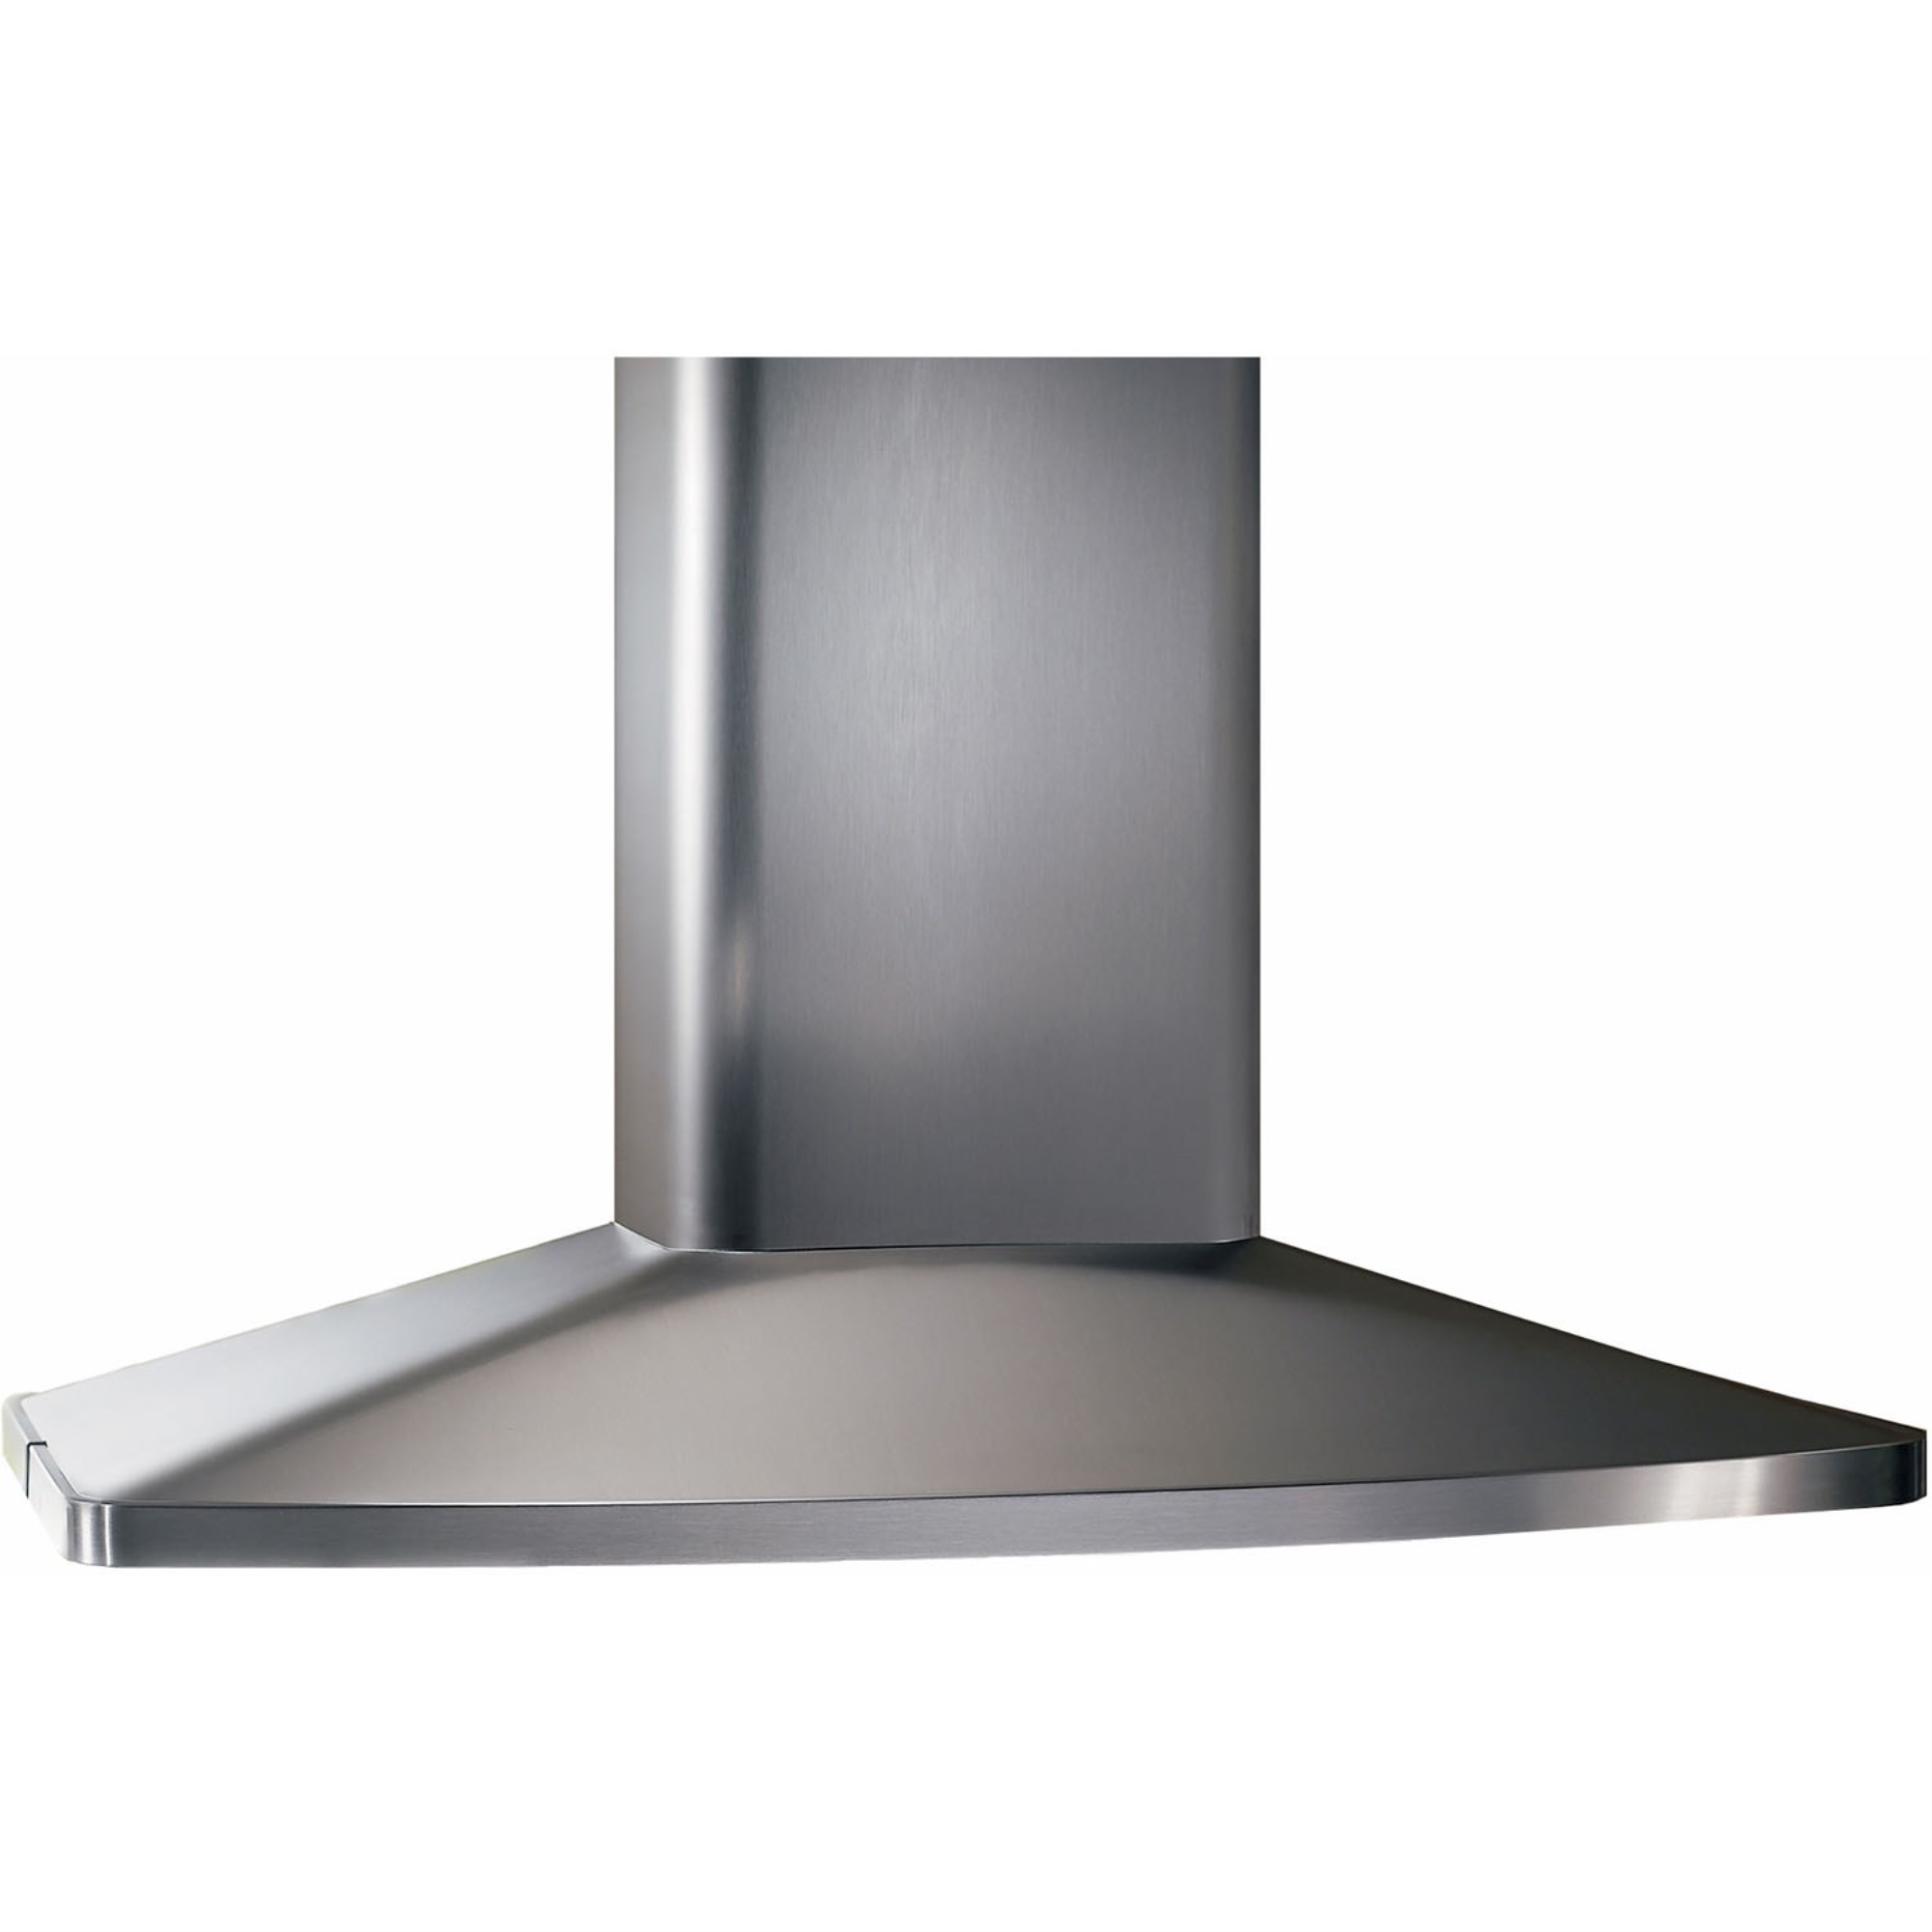 Island Chimney Hood with 480 CFM Blower - Stainless Steel